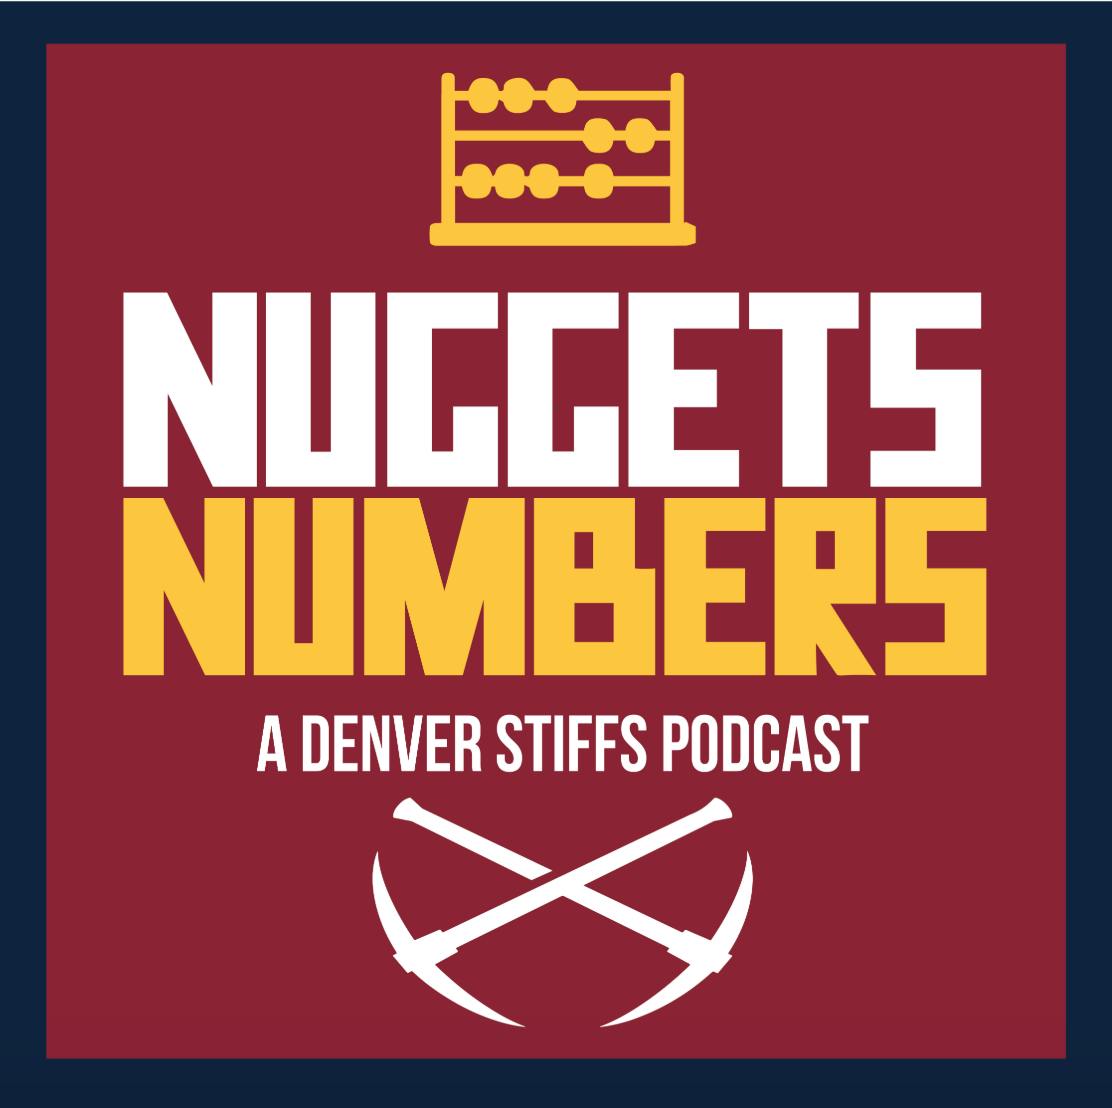 Live reaction to Jrue Holiday trade with Jeff Morton, plus thoughts on Harden, CP3, and the Nuggets | Nuggets Numbers